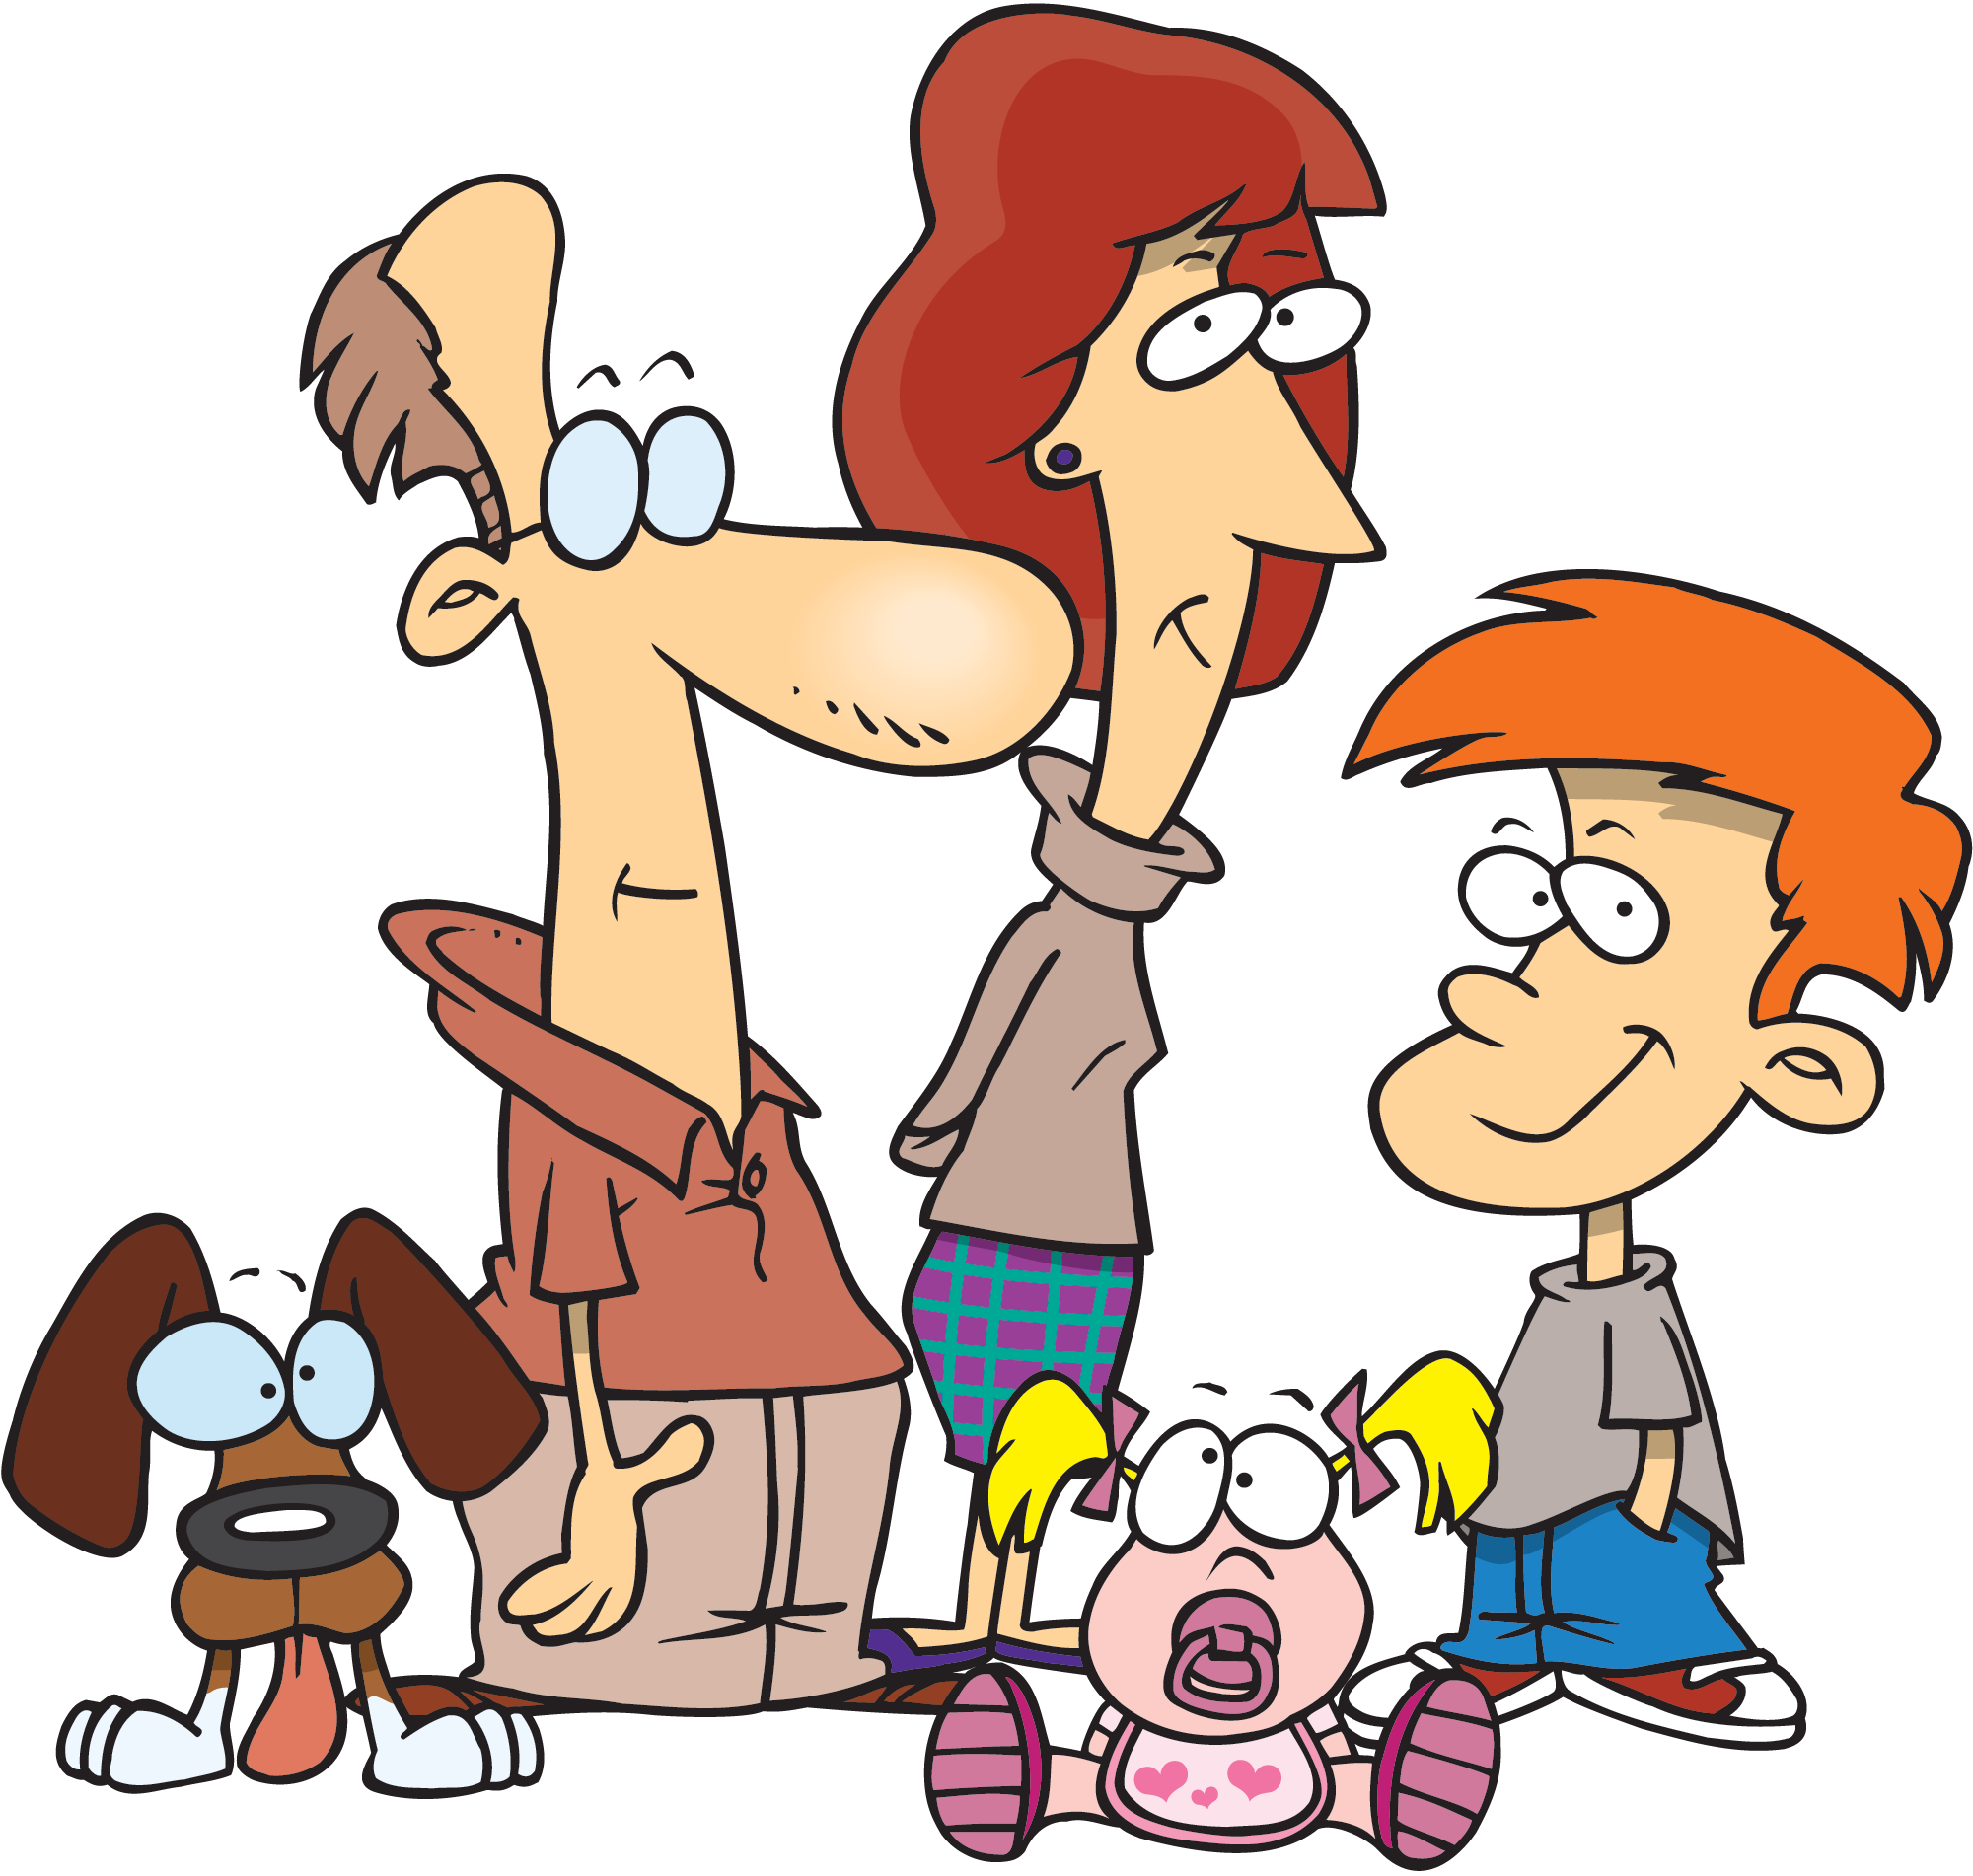 Png Family Of 6 - Cartoon Family Of 6 #1596267, Transparent background PNG HD thumbnail